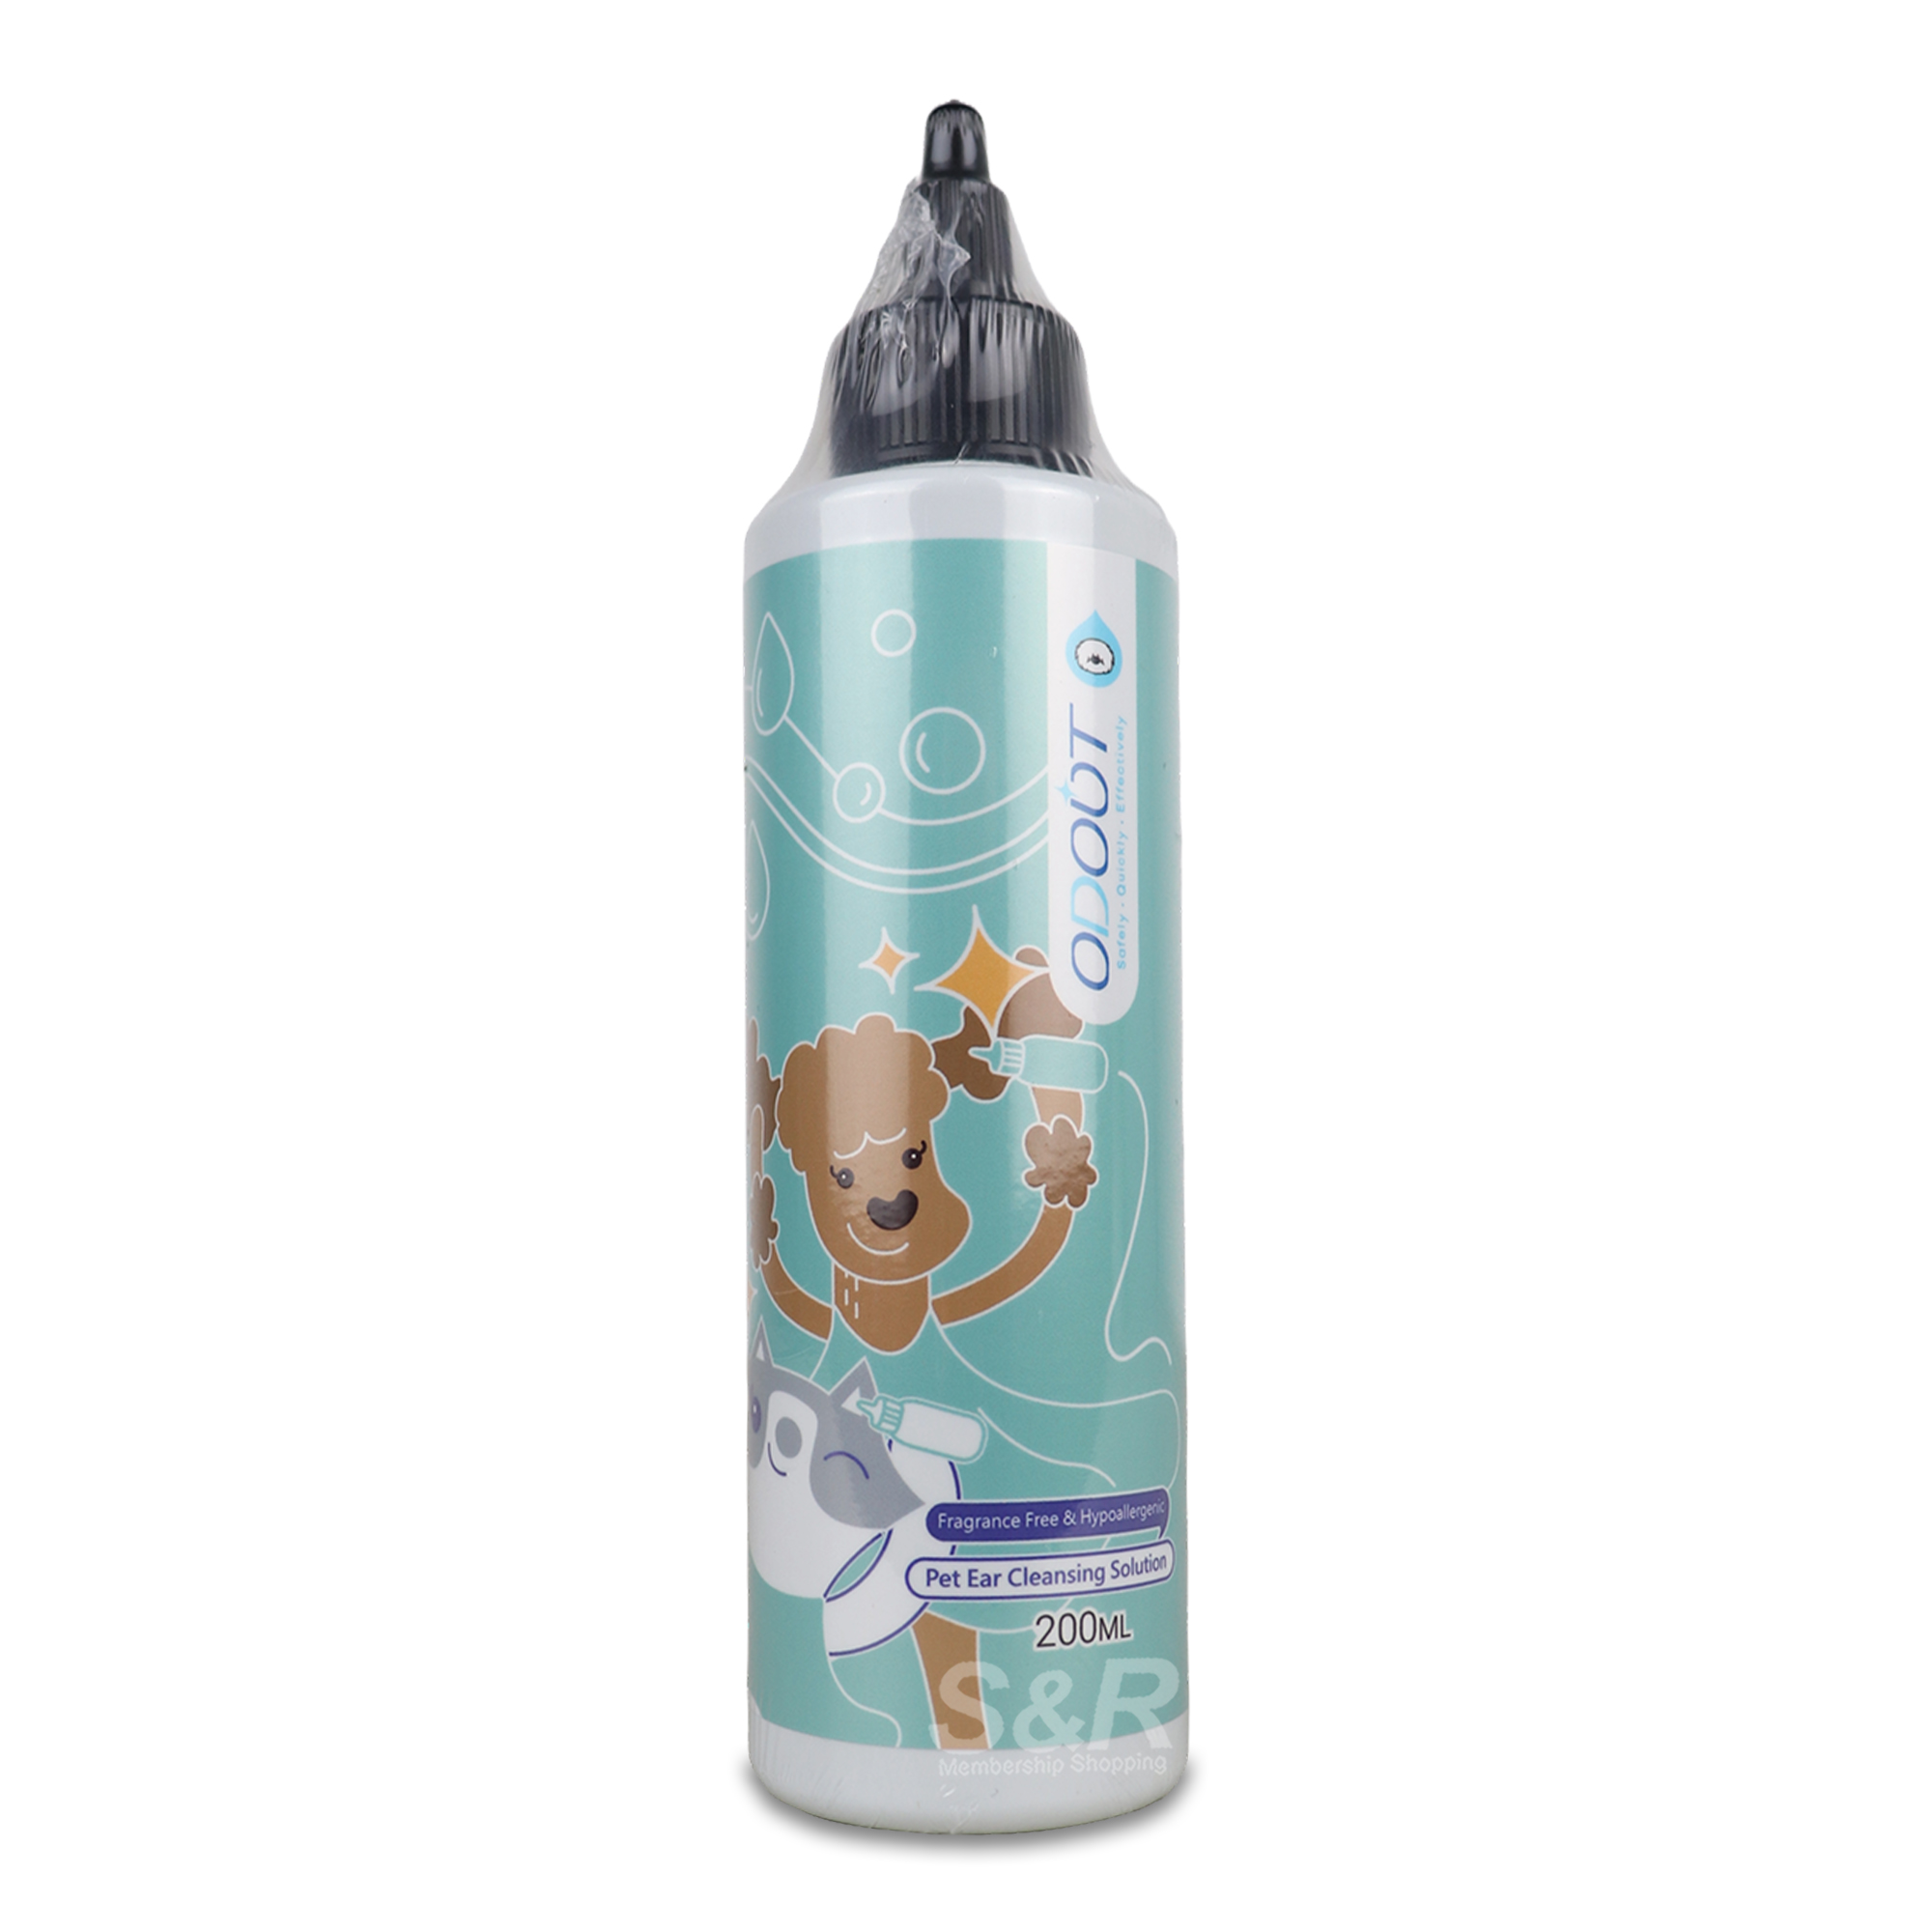 Odout Pet Ear Cleansing Solution 200mL